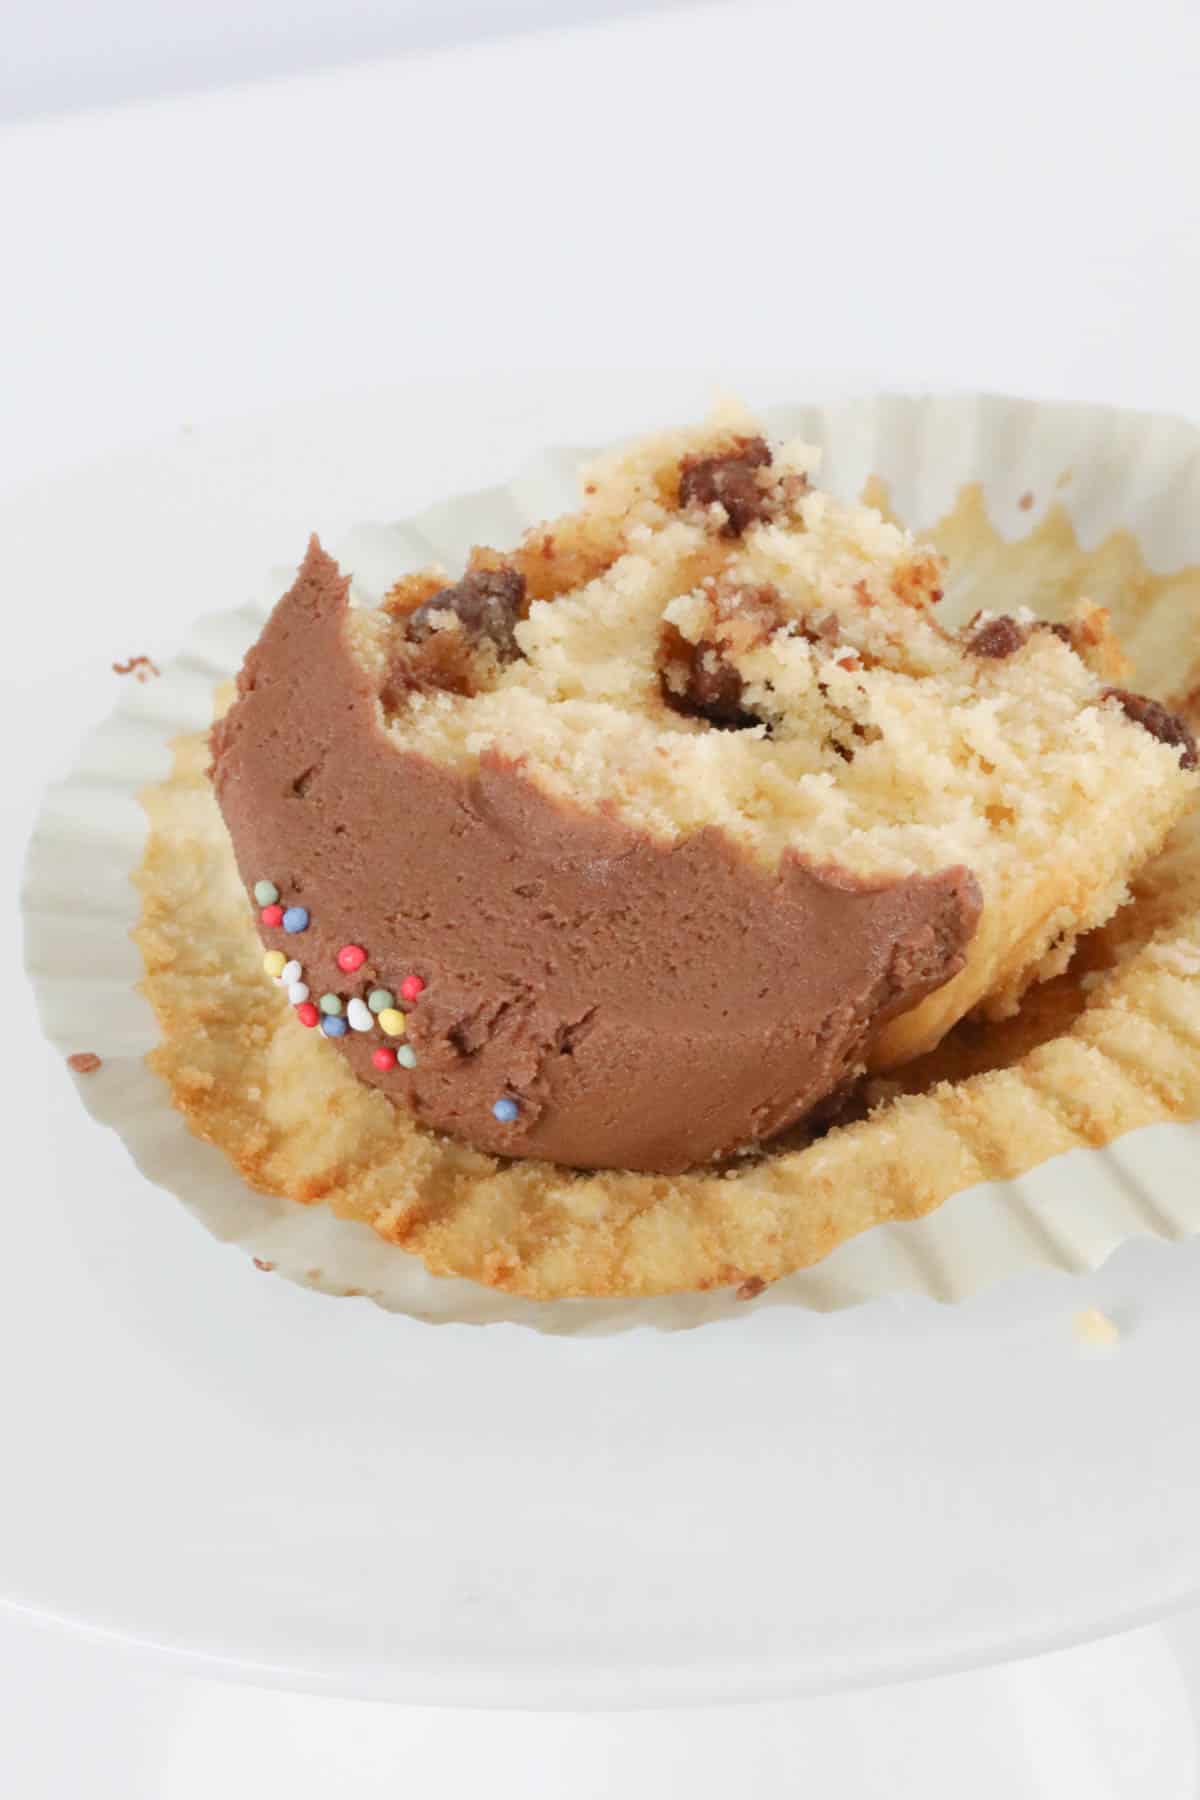 A chocolate chip cupcake with chocolate butterceam.